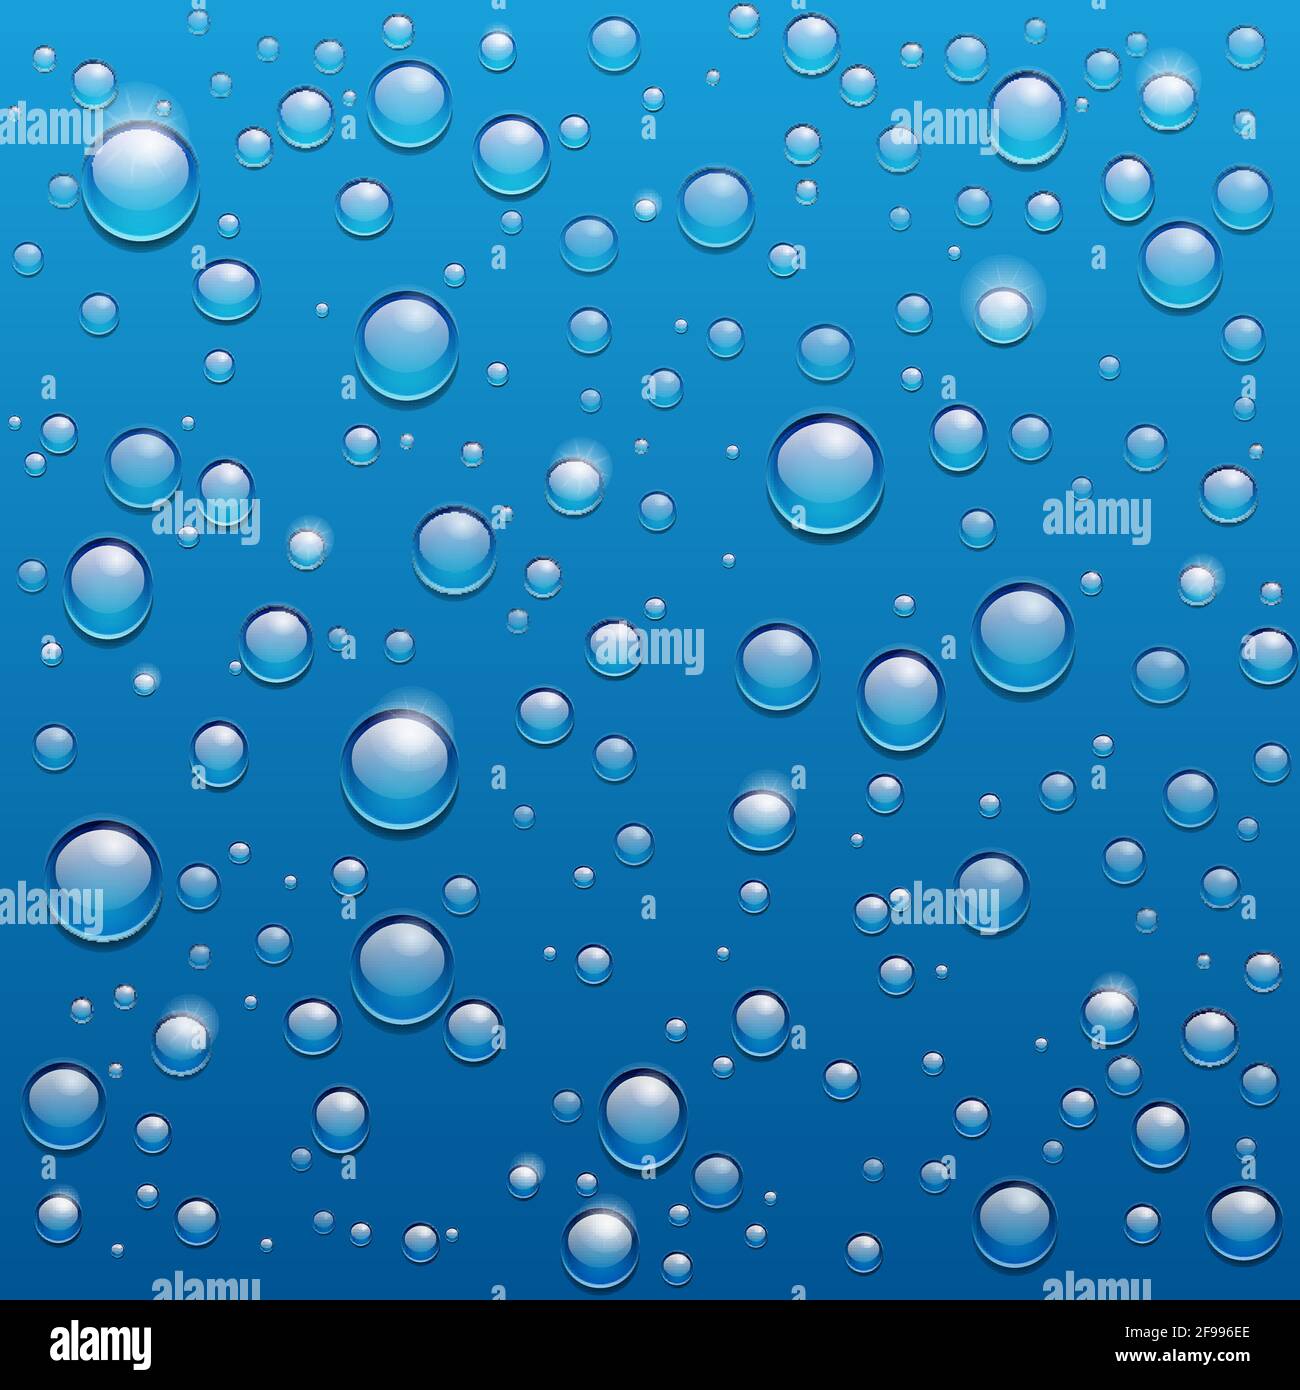 Wetness Vector Vectors High Resolution Stock Photography and Images - Alamy